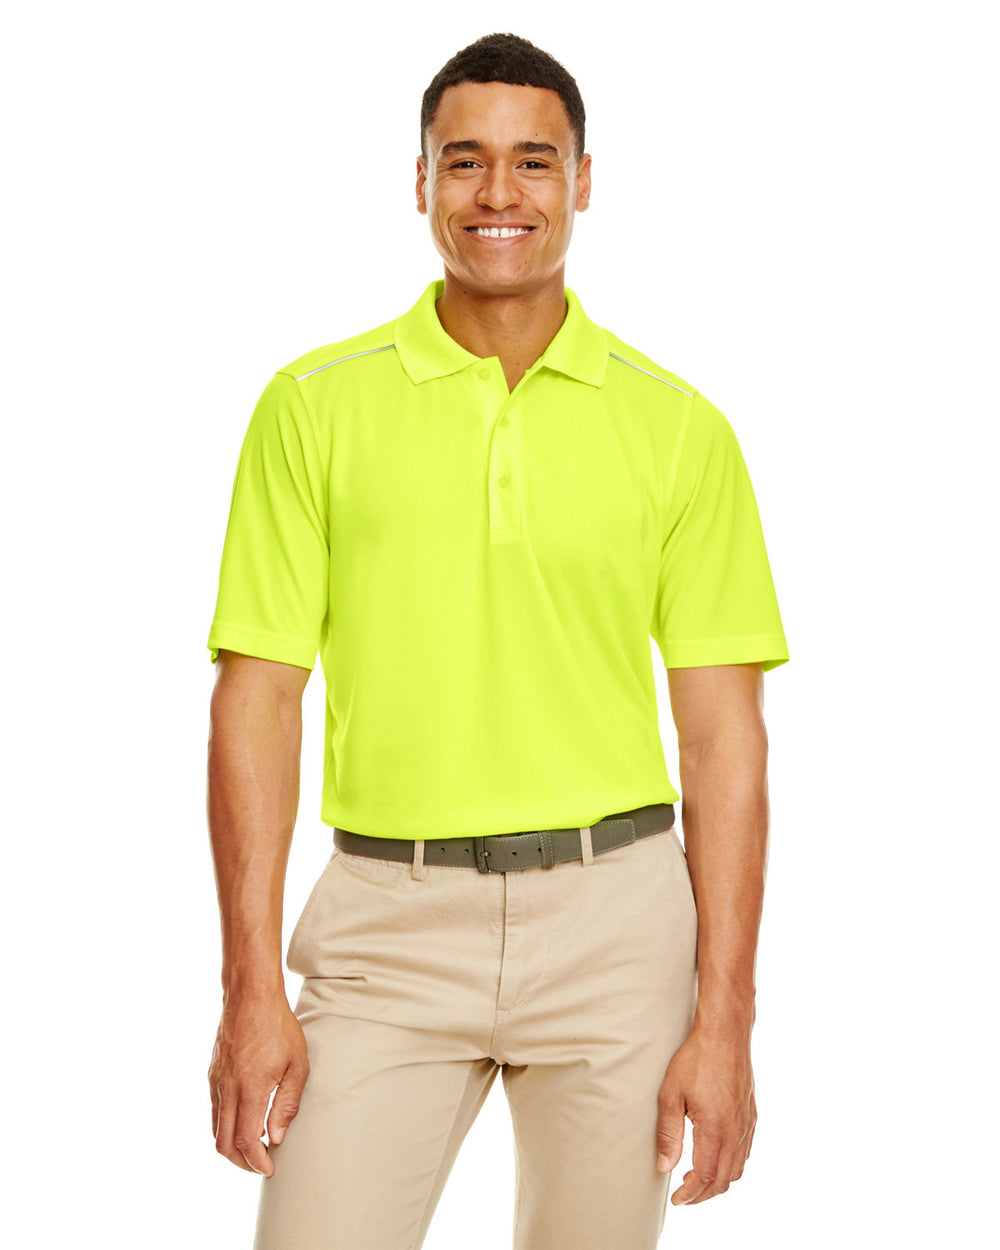 Core 365 88181R Men's Radiant Performance Piqu Polo withReflective Piping